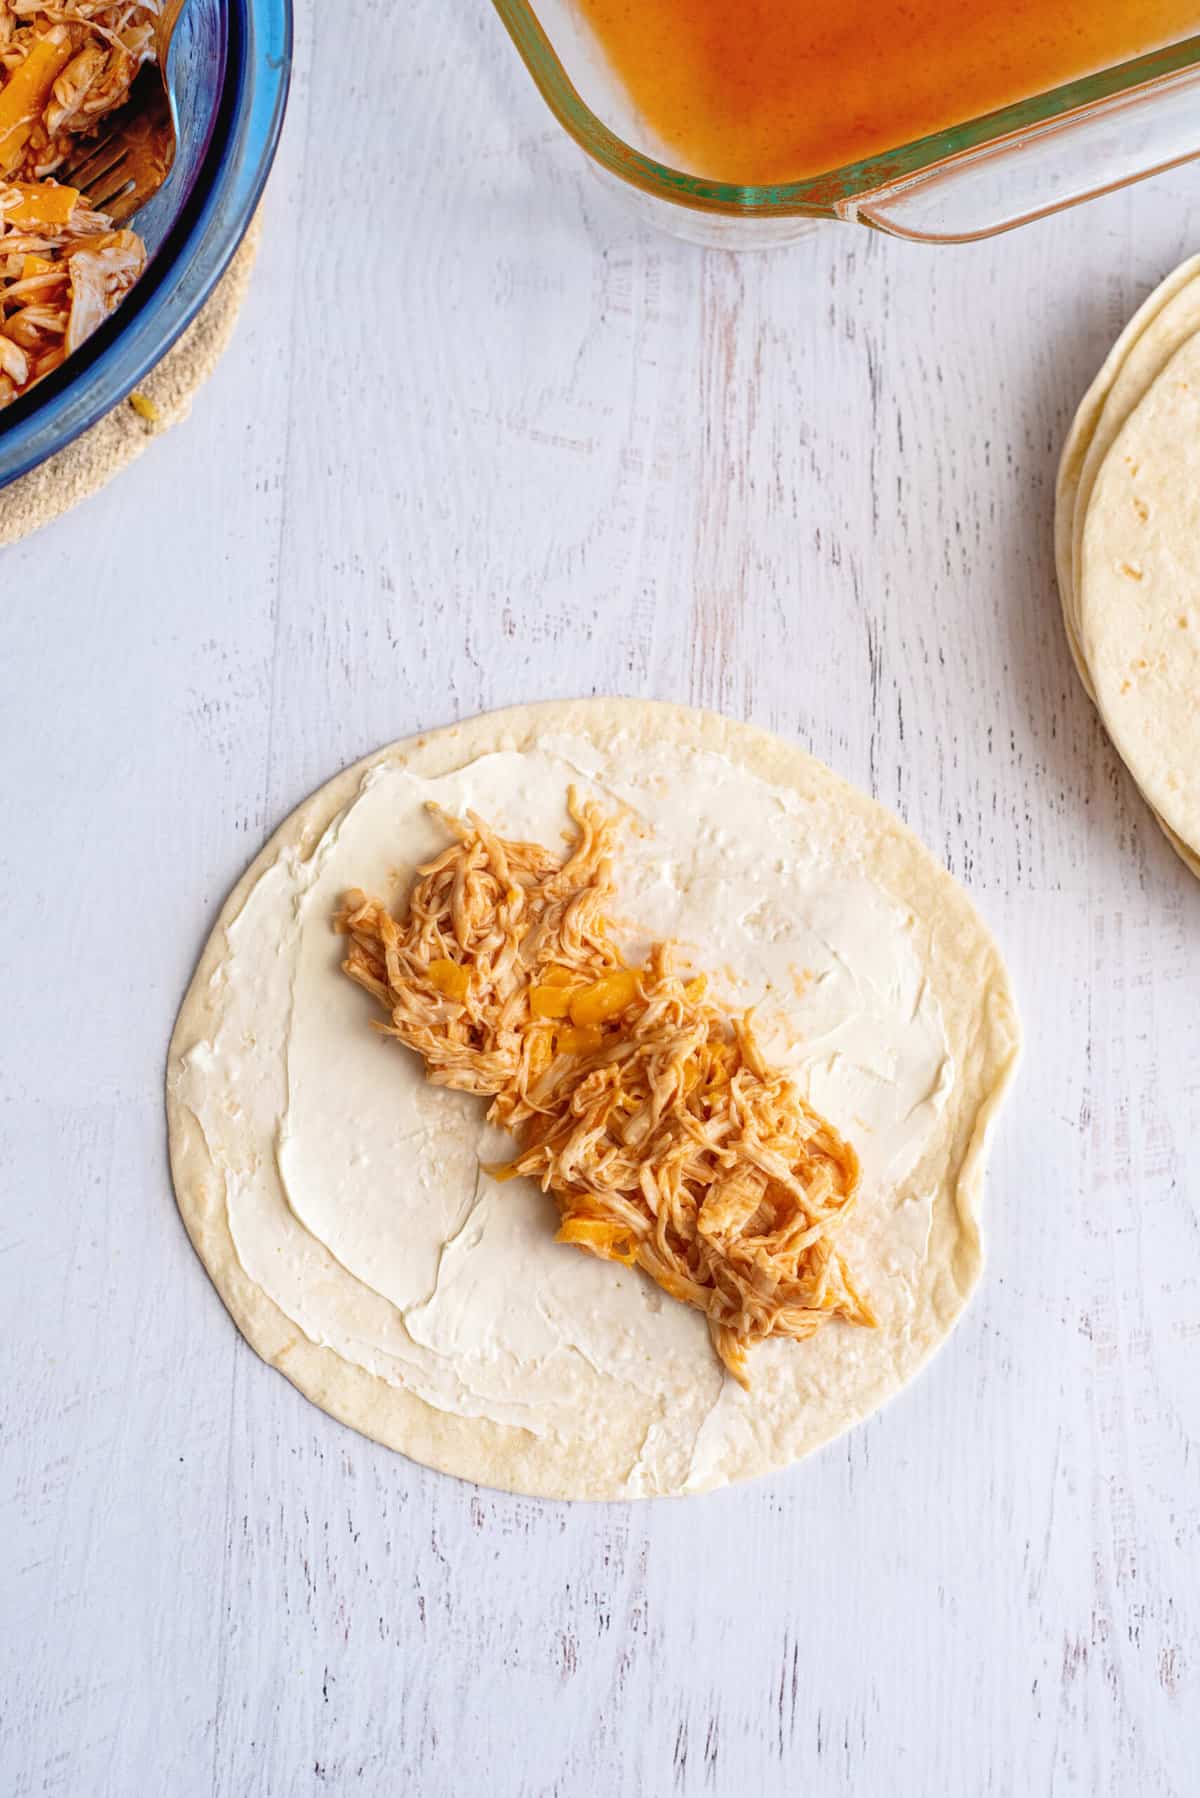 Place few tablespoons of chicken mixture on tortilla.